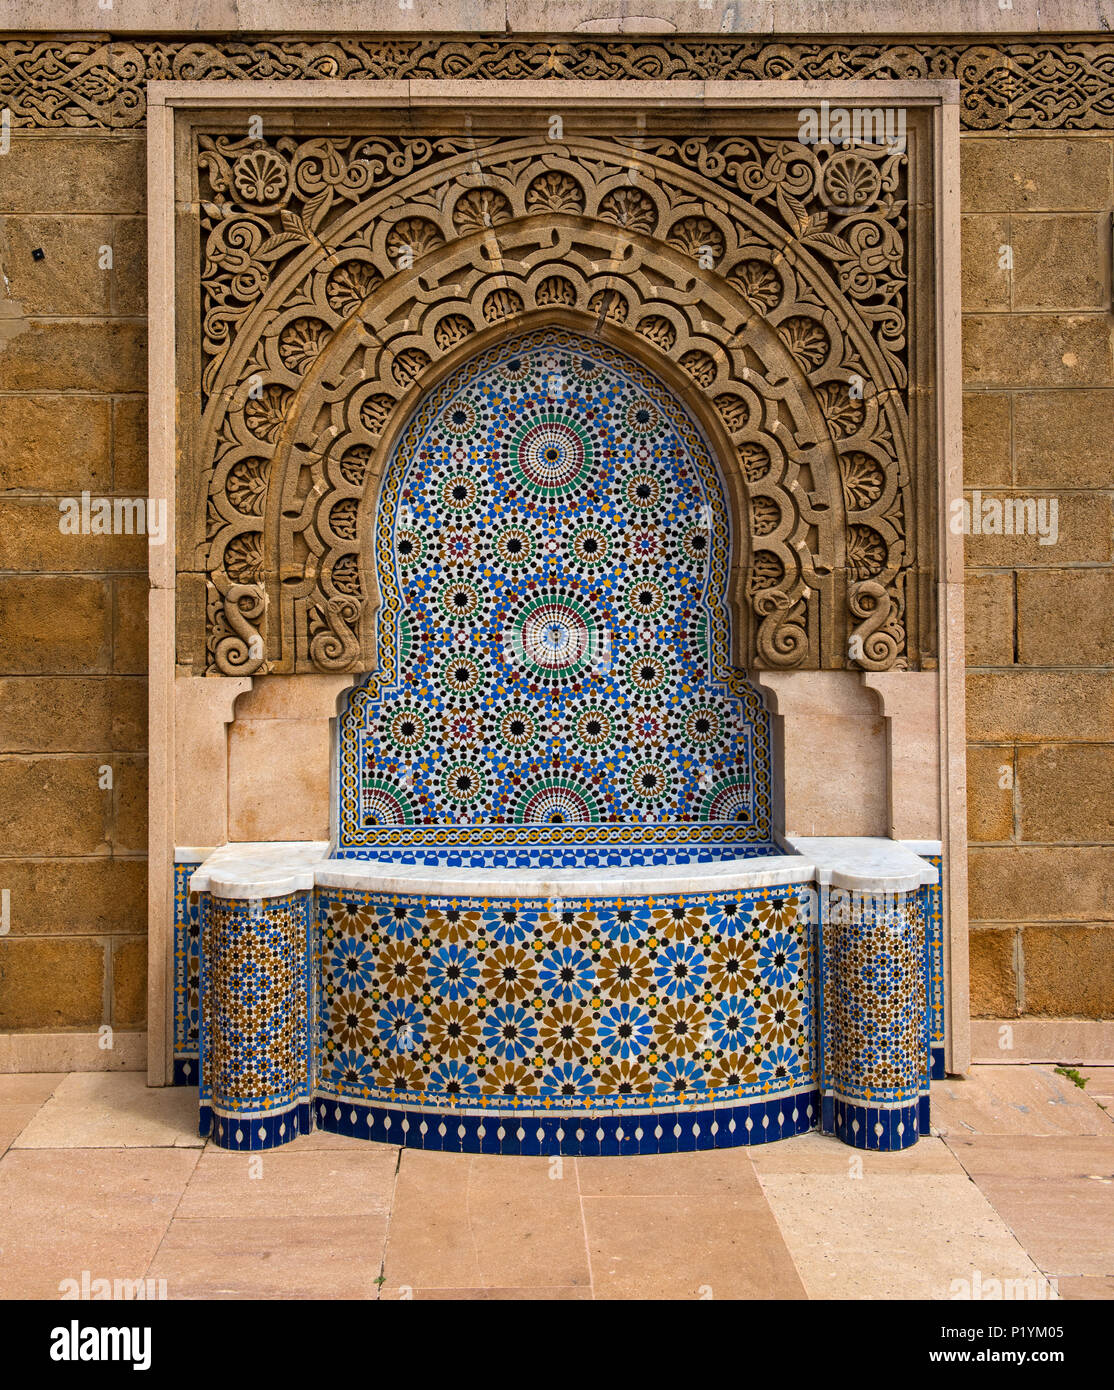 Morocco Decorated fountain with mosaic tiles in Rabat Stock Photo